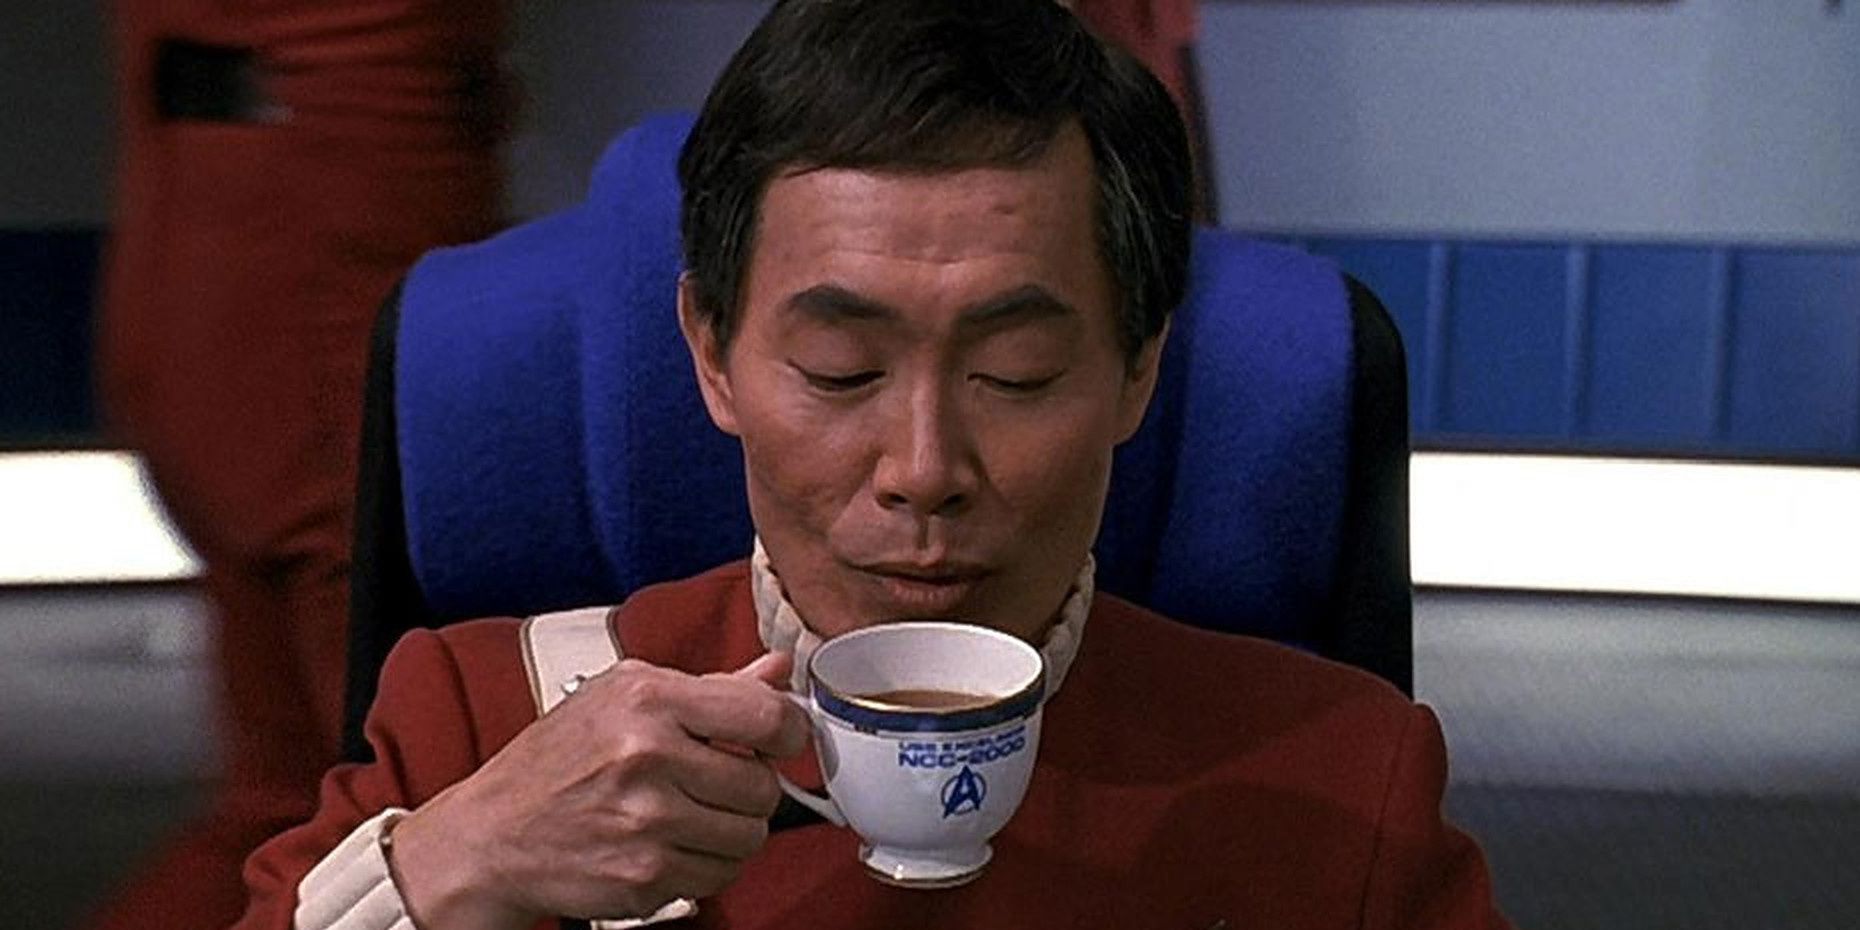 Sulu drinks tea on the deck of the Excelsior Star Trek VI The Undiscovered Country